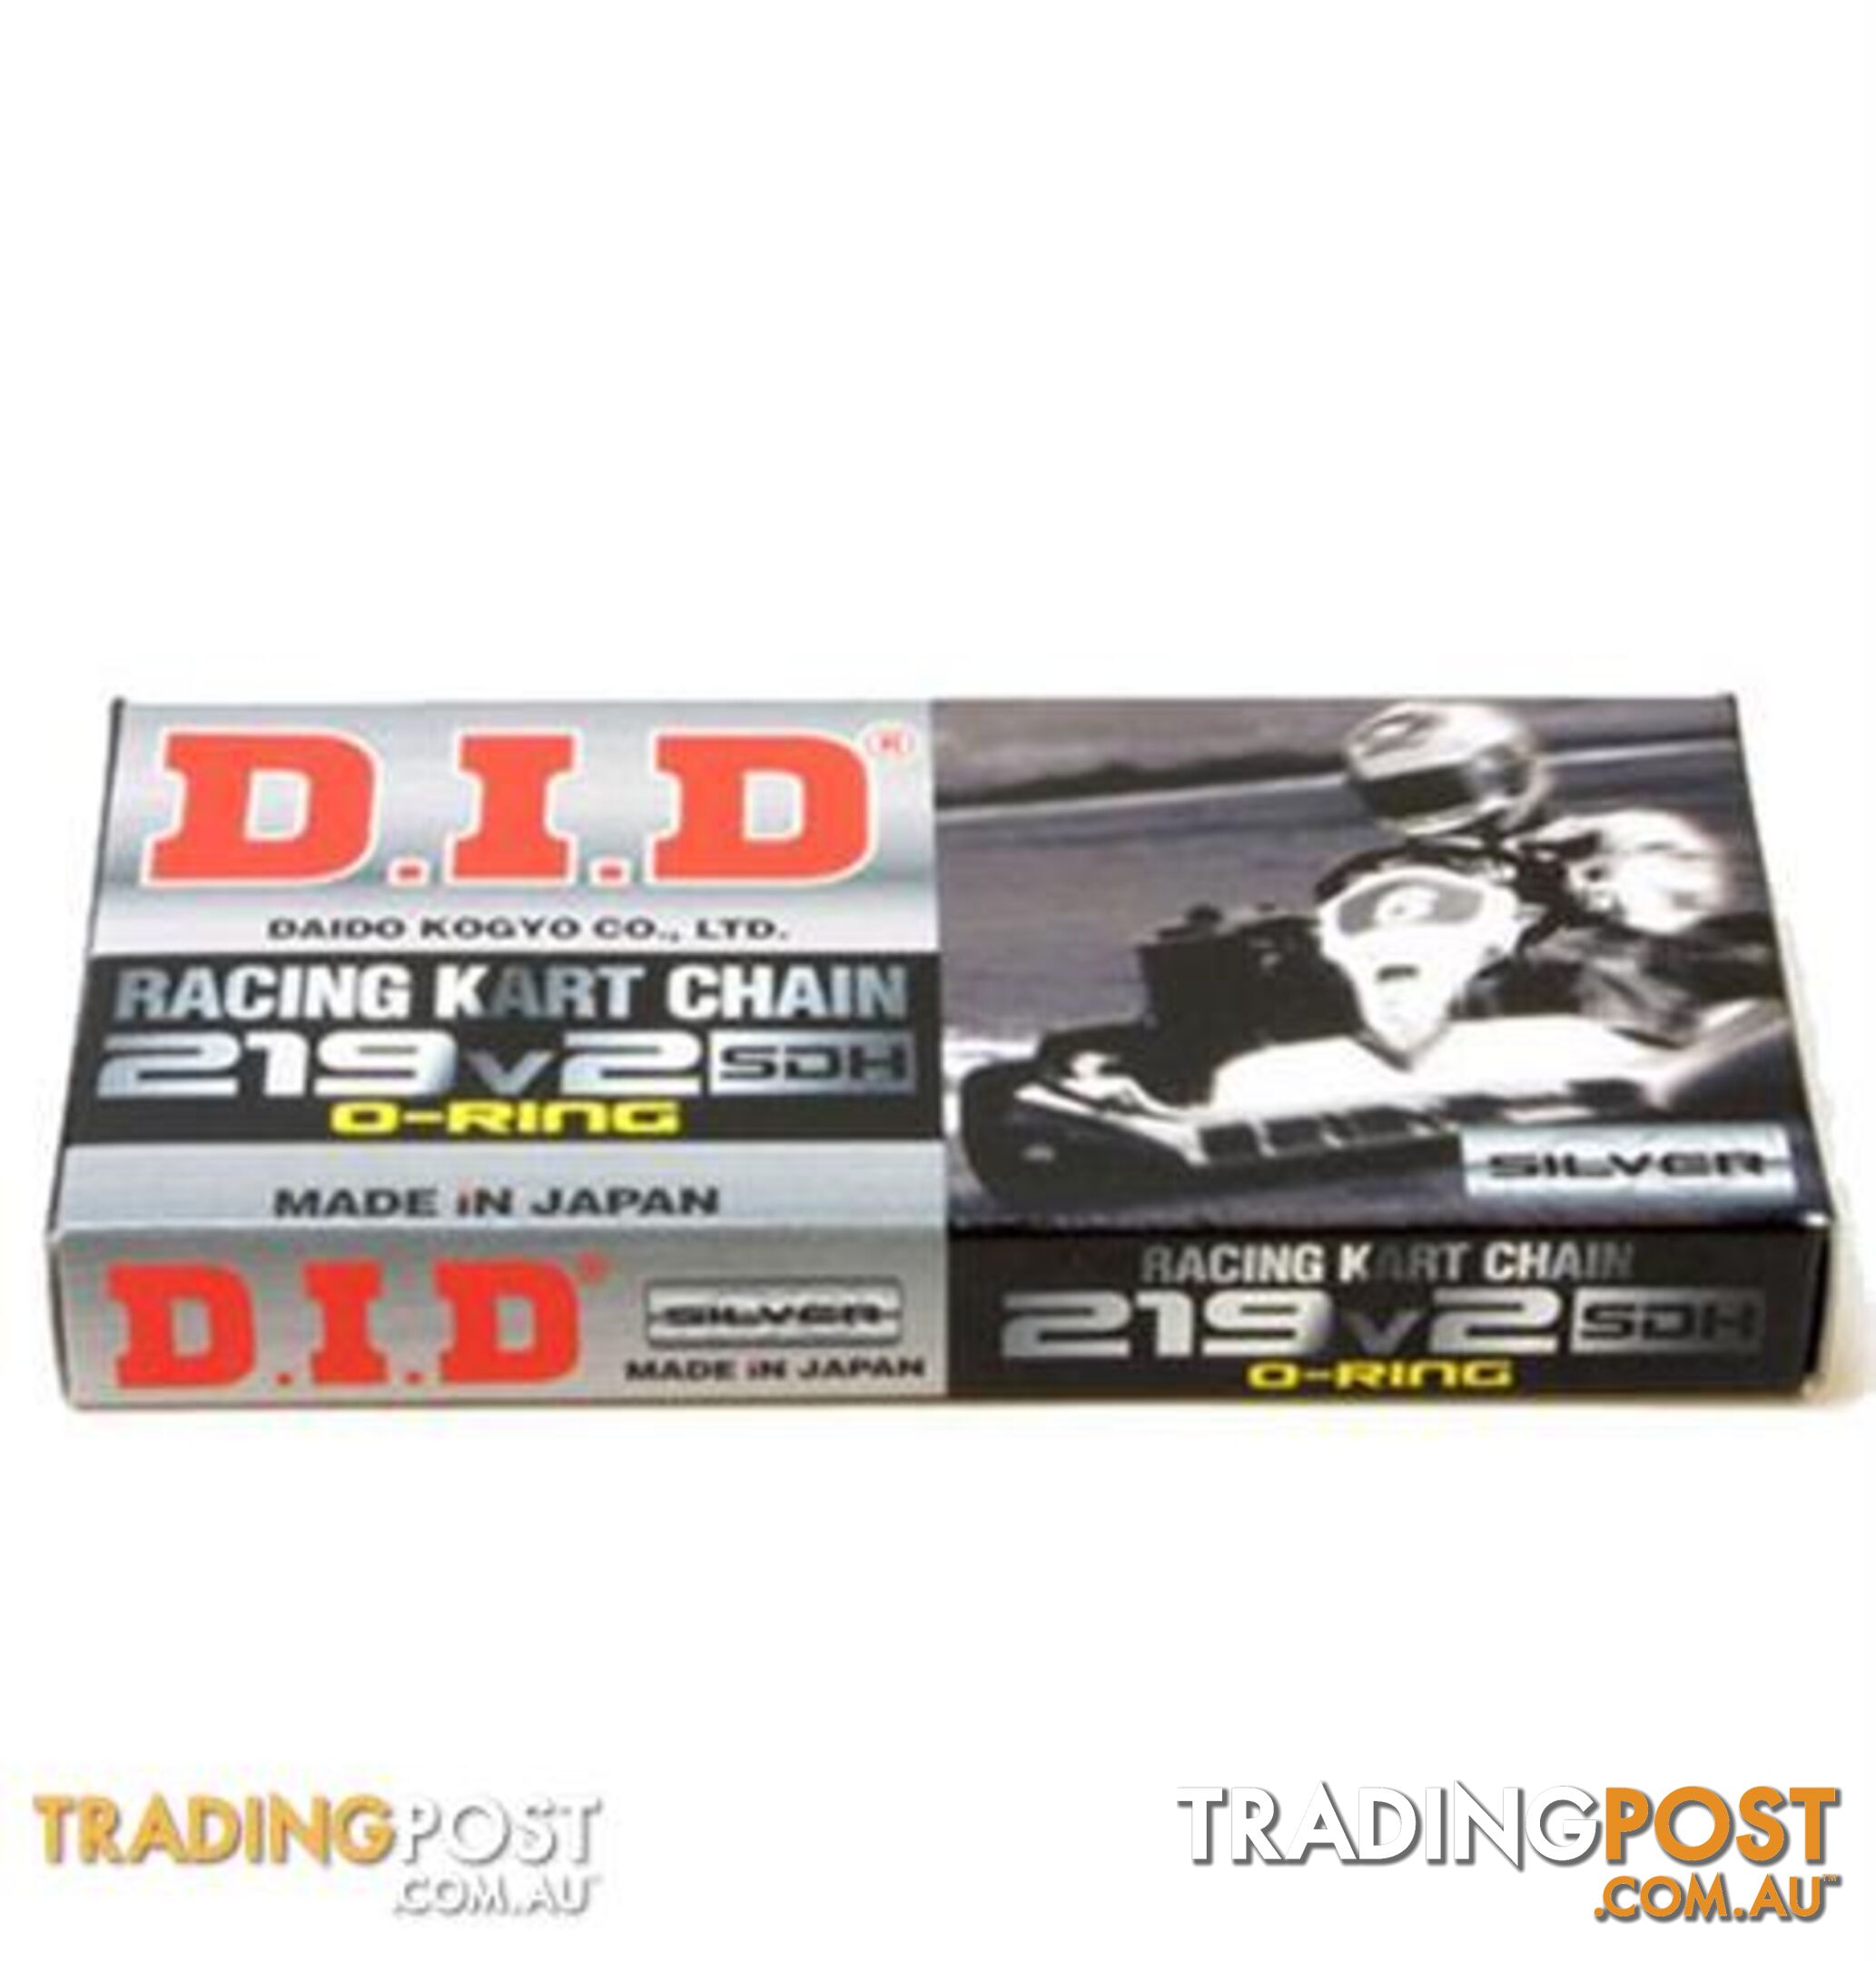 Go Kart DID Oring Chain  EXTRA Heavy Duty 106 Link - ALL BRAND NEW !!!